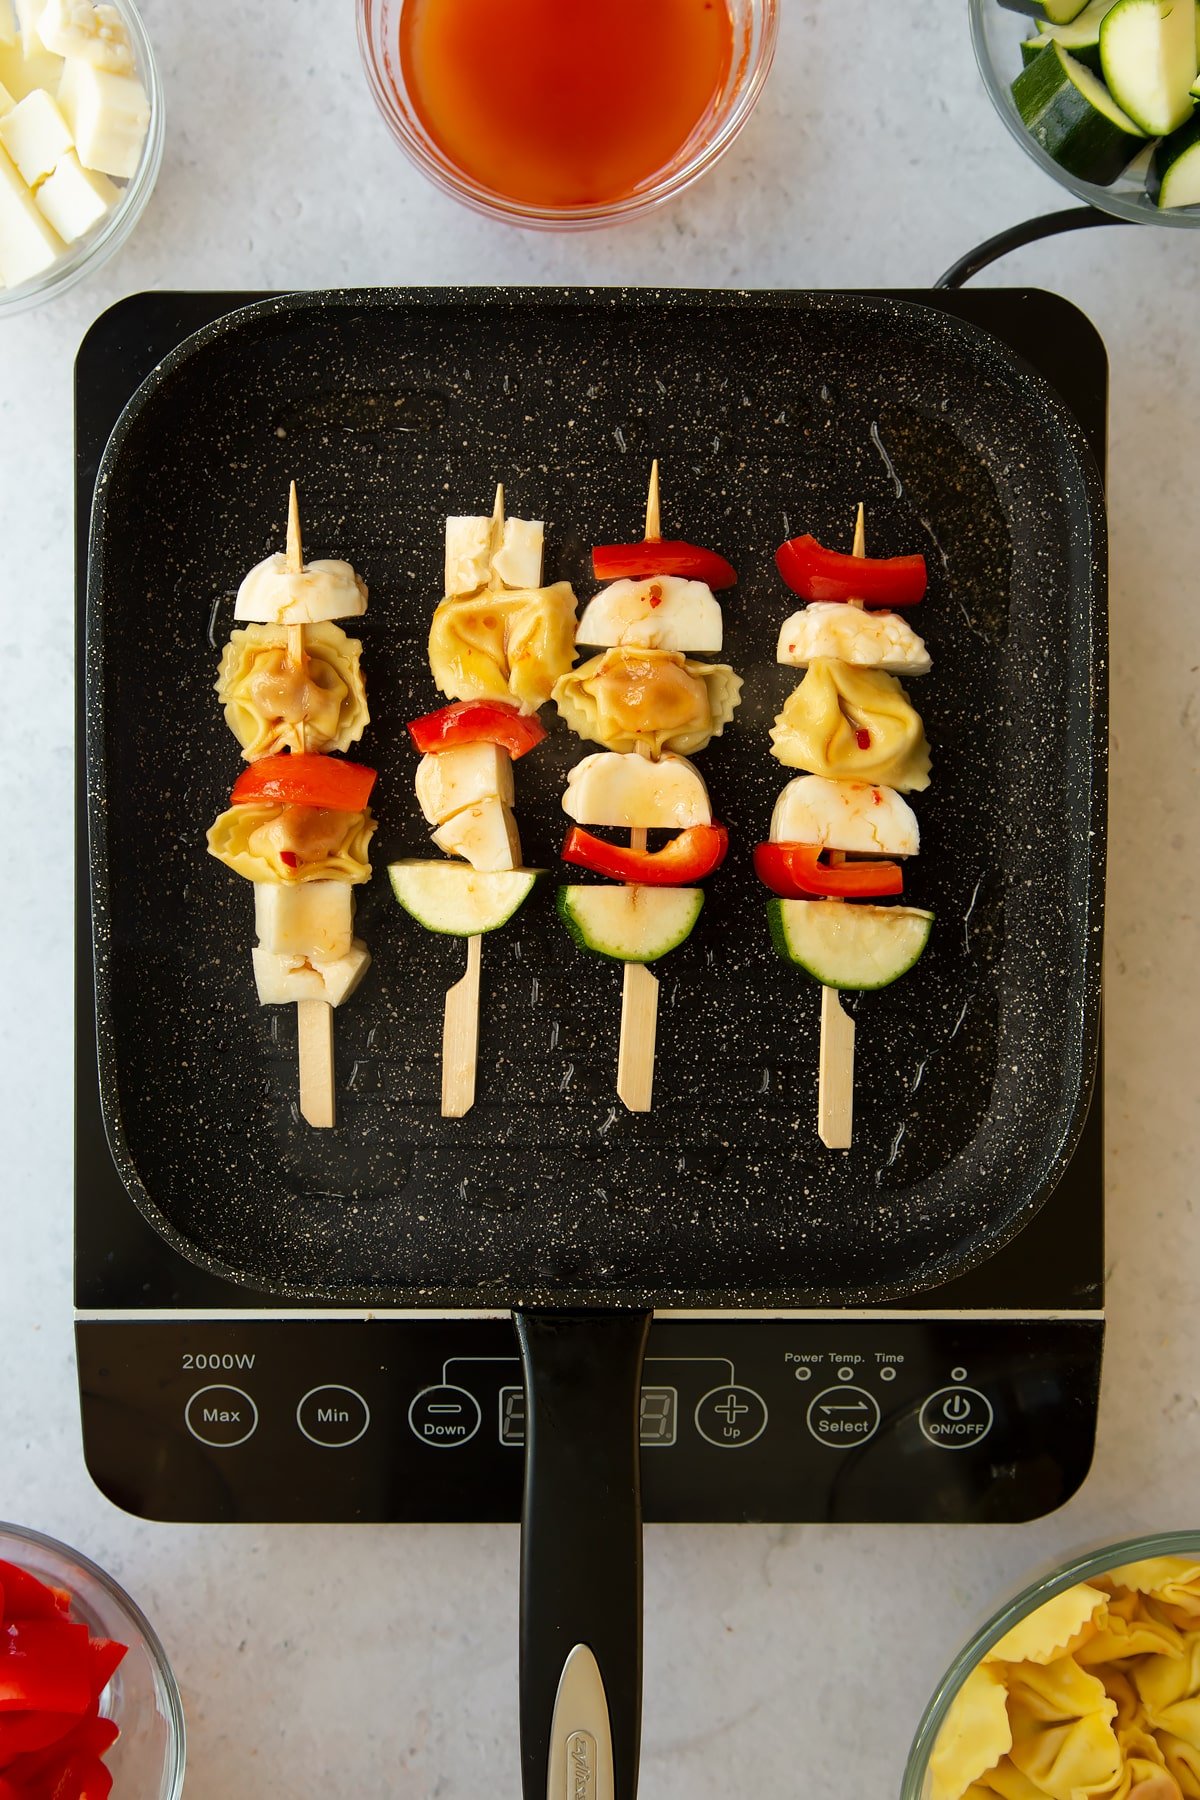 a frying pan on an induction hob with 4 halloumi skewers inside cooking in oil.